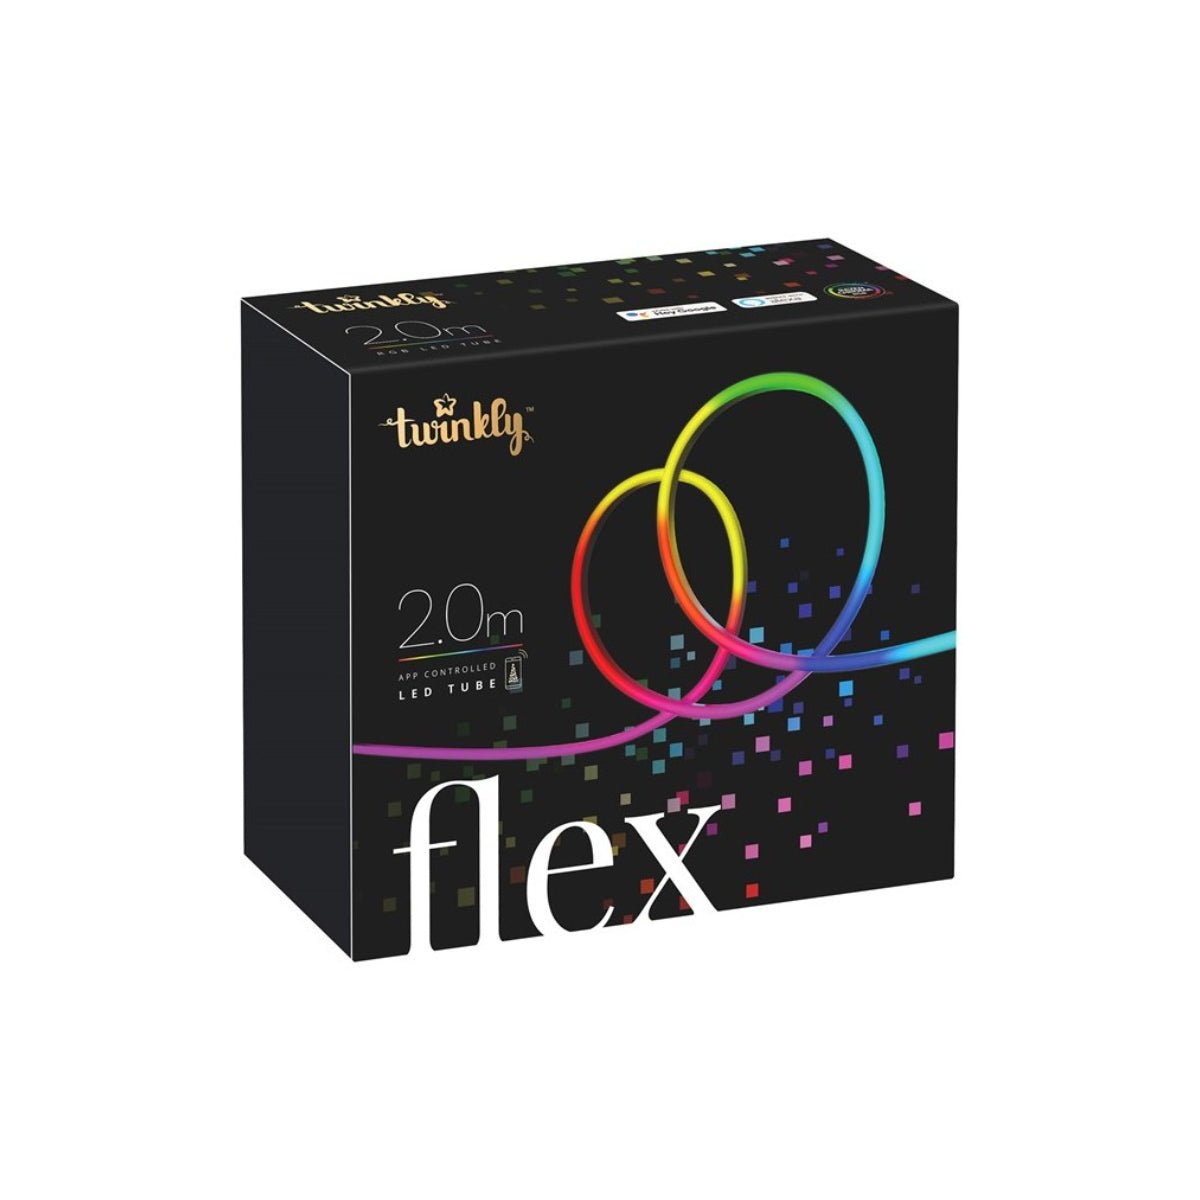 Twinkly App-controlled Flexible Gen II 2m LED Tube - White - إضاءة - Store 974 | ستور ٩٧٤